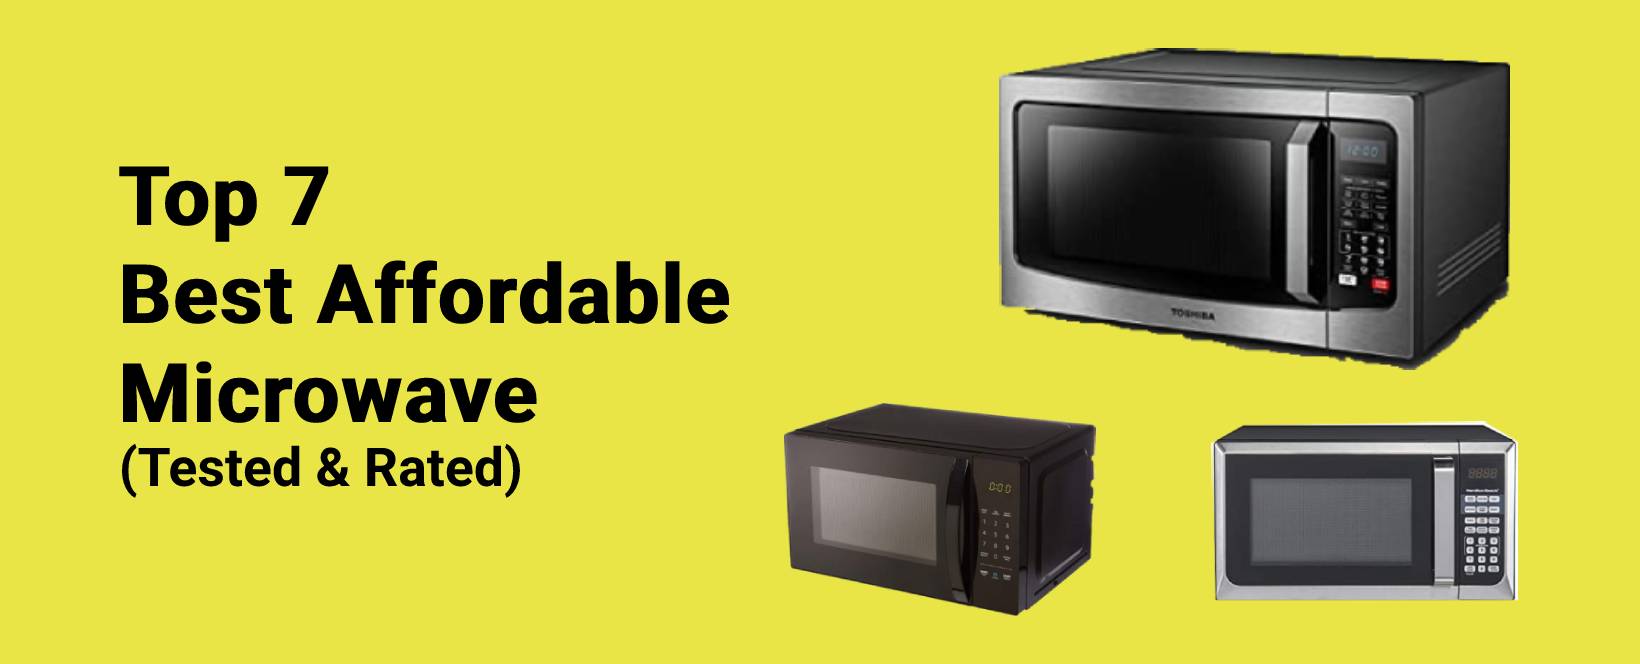 best-affordable-microwave